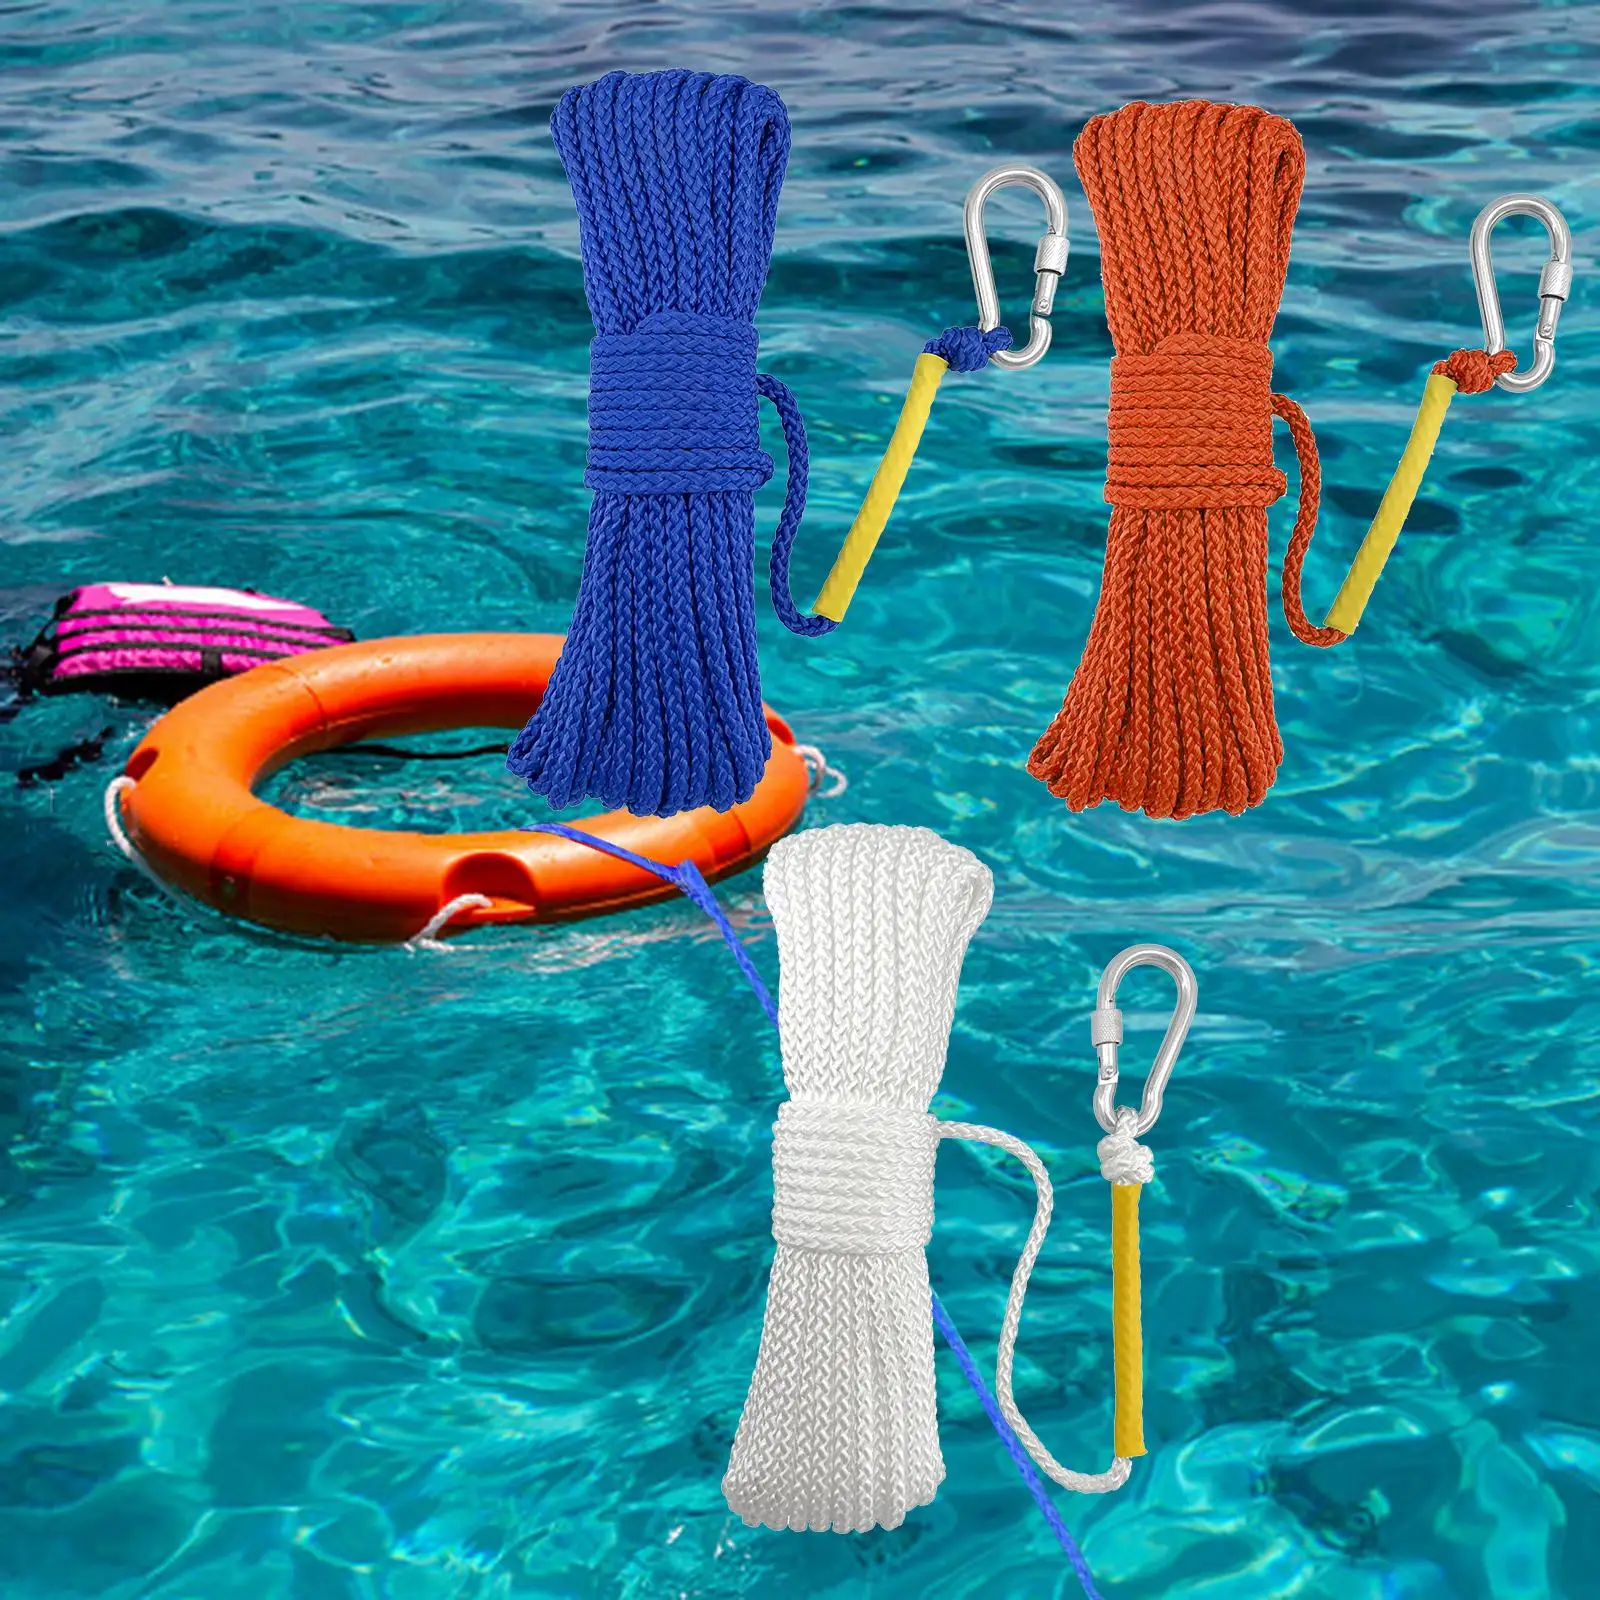 Fishing Nylon Rope, with  High Strength Line Rope Cord for Magnet Fishing Tent Rope Retrieving Items Commercial Clothesline